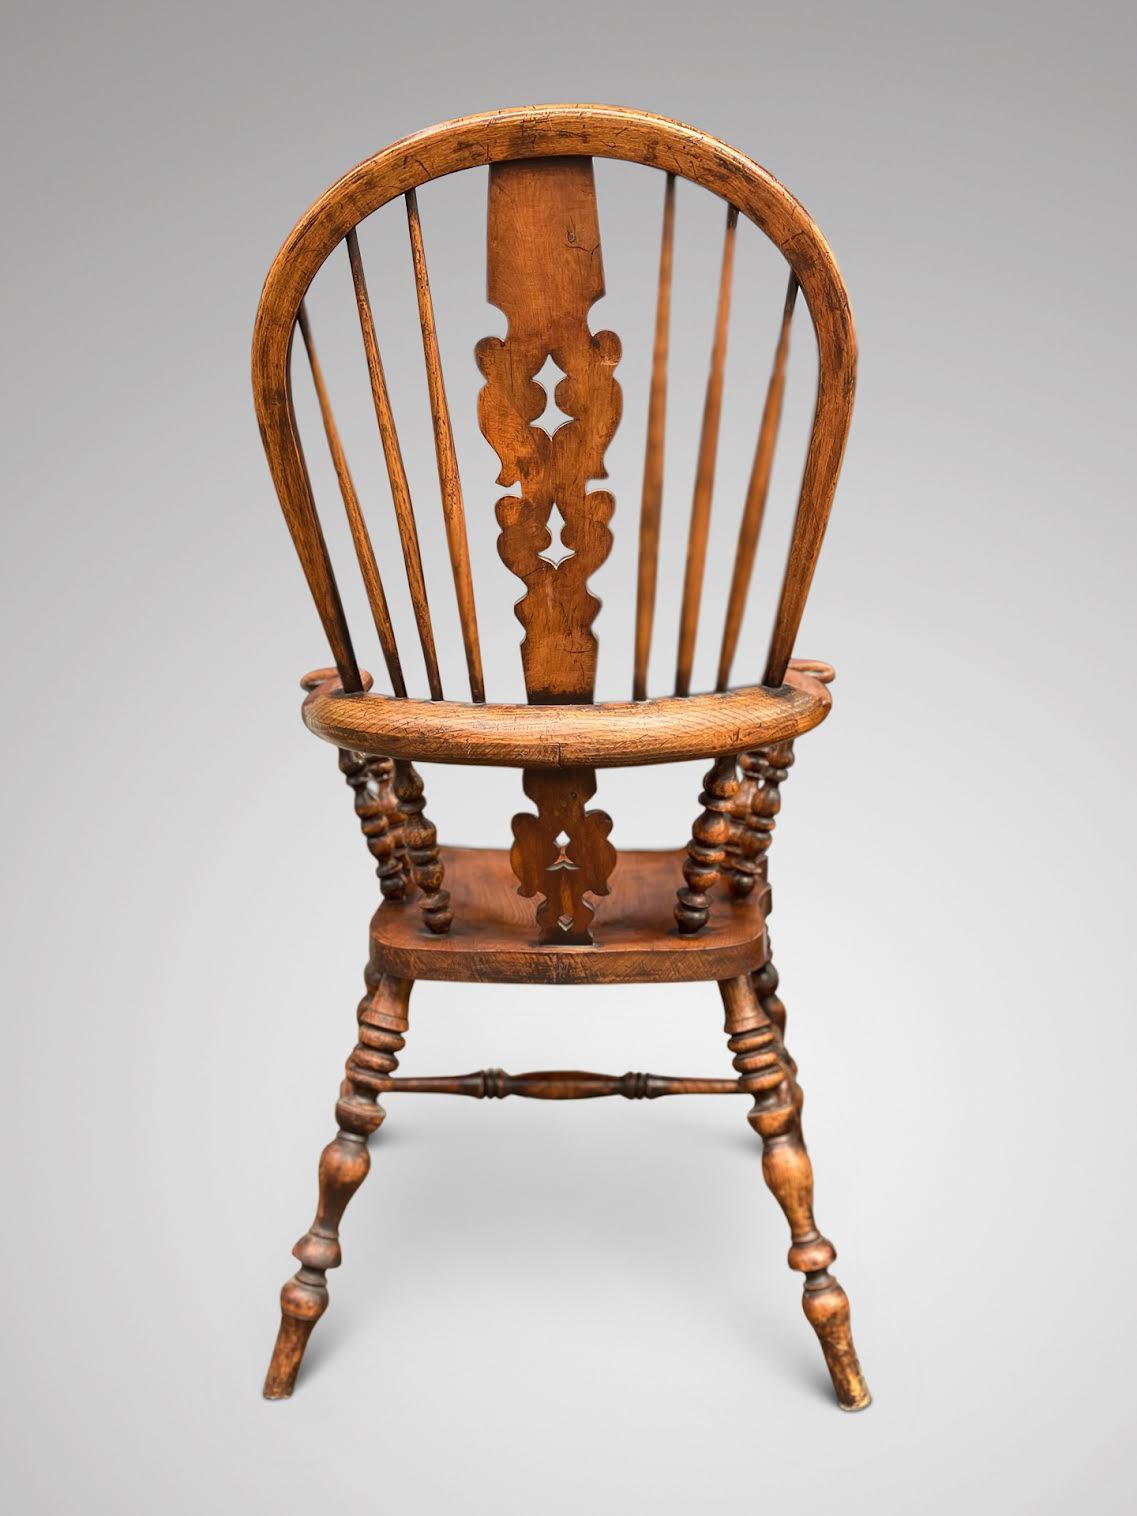 British Charming 19th Century Elm Broad Arm Windsor Chair For Sale